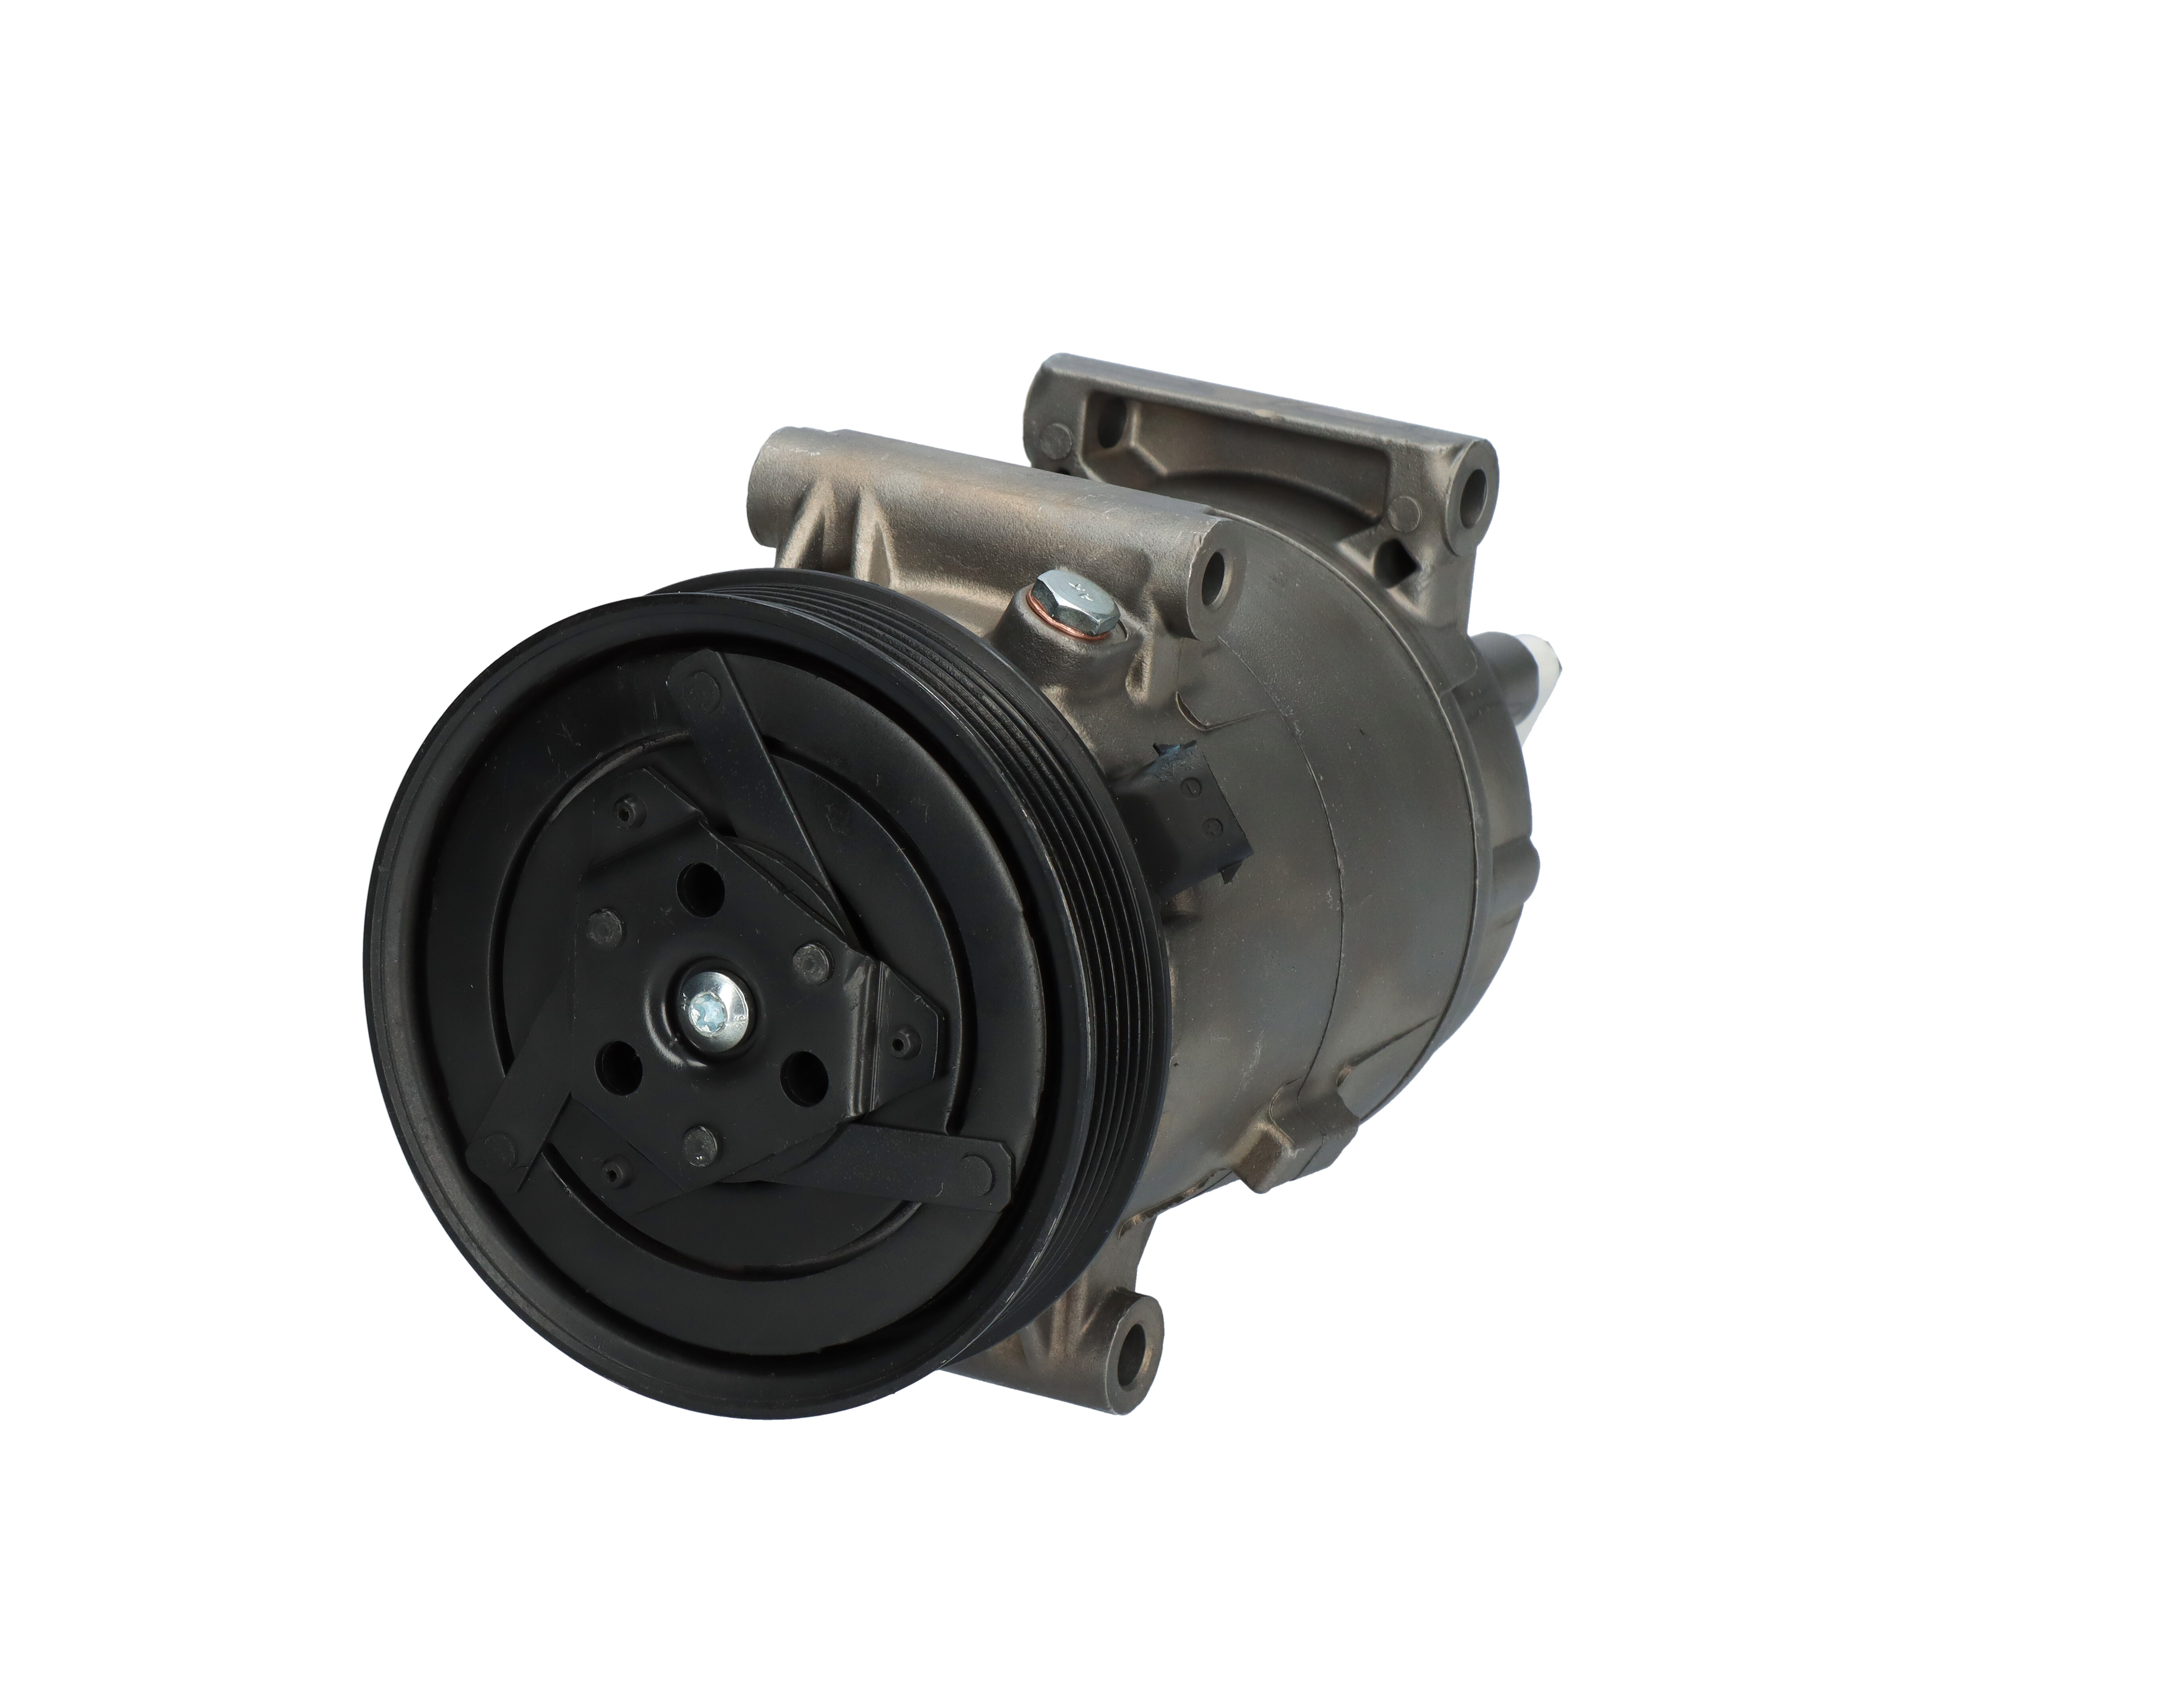 VALEO 699746 Air conditioning compressor CVC, 12V, PAG 46, R 134a, with PAG compressor oil, REMANUFACTURED